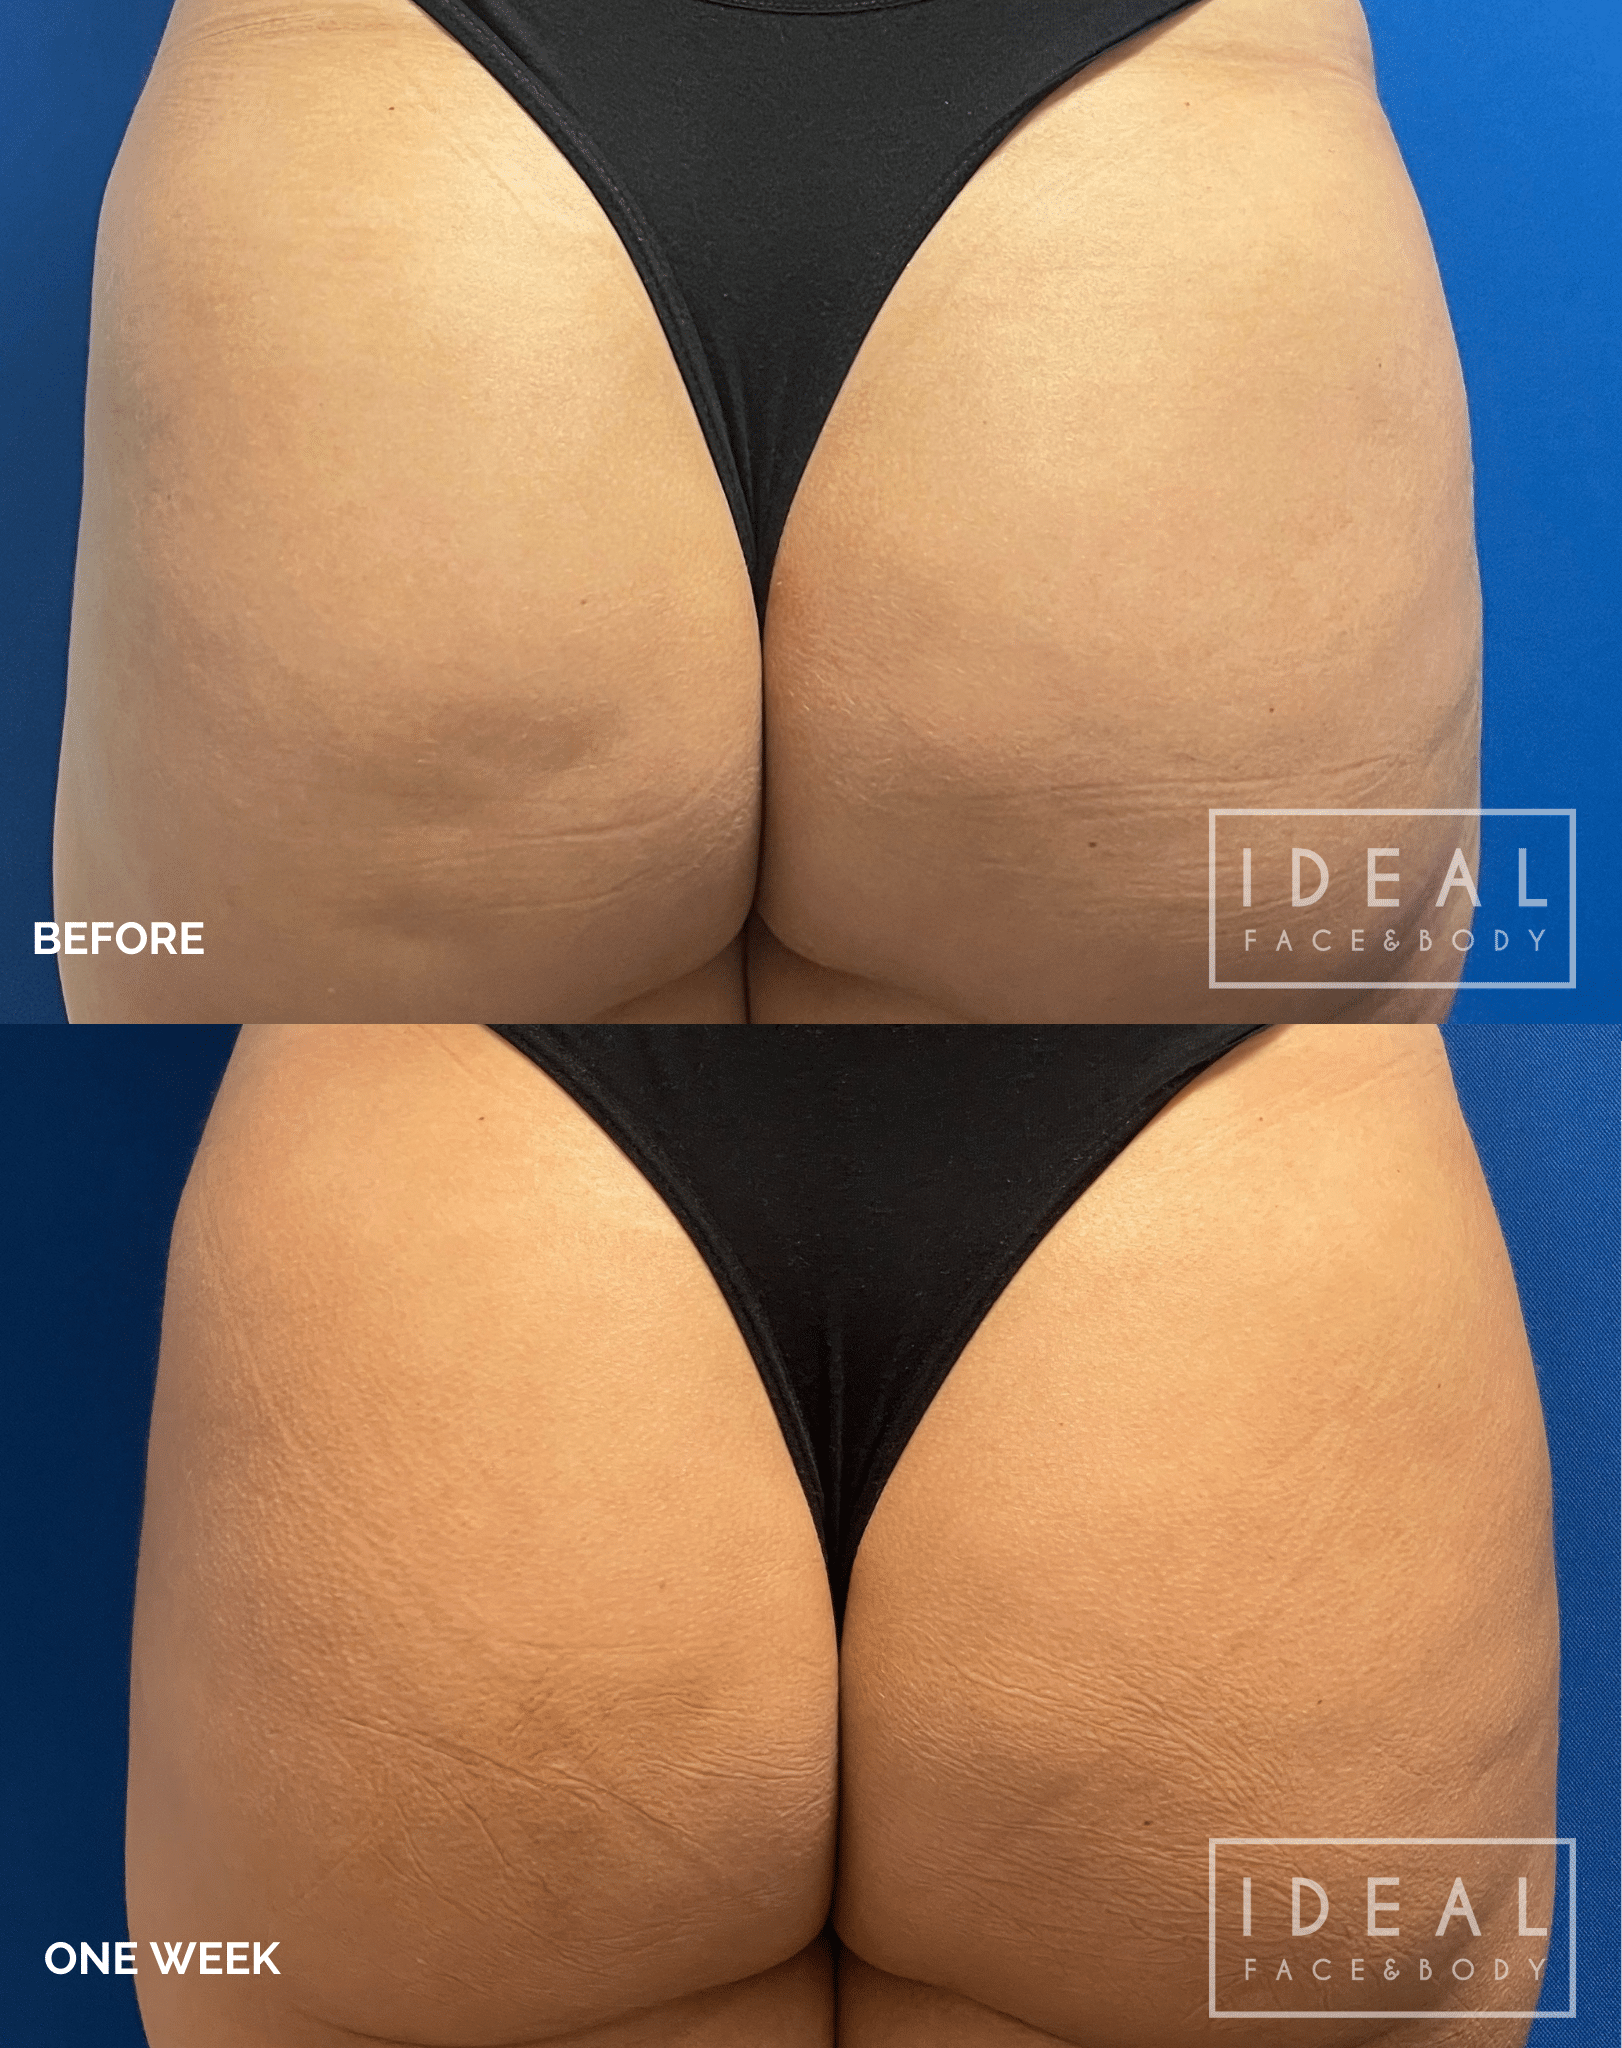 Before and one week after Aveli cellulite treatment